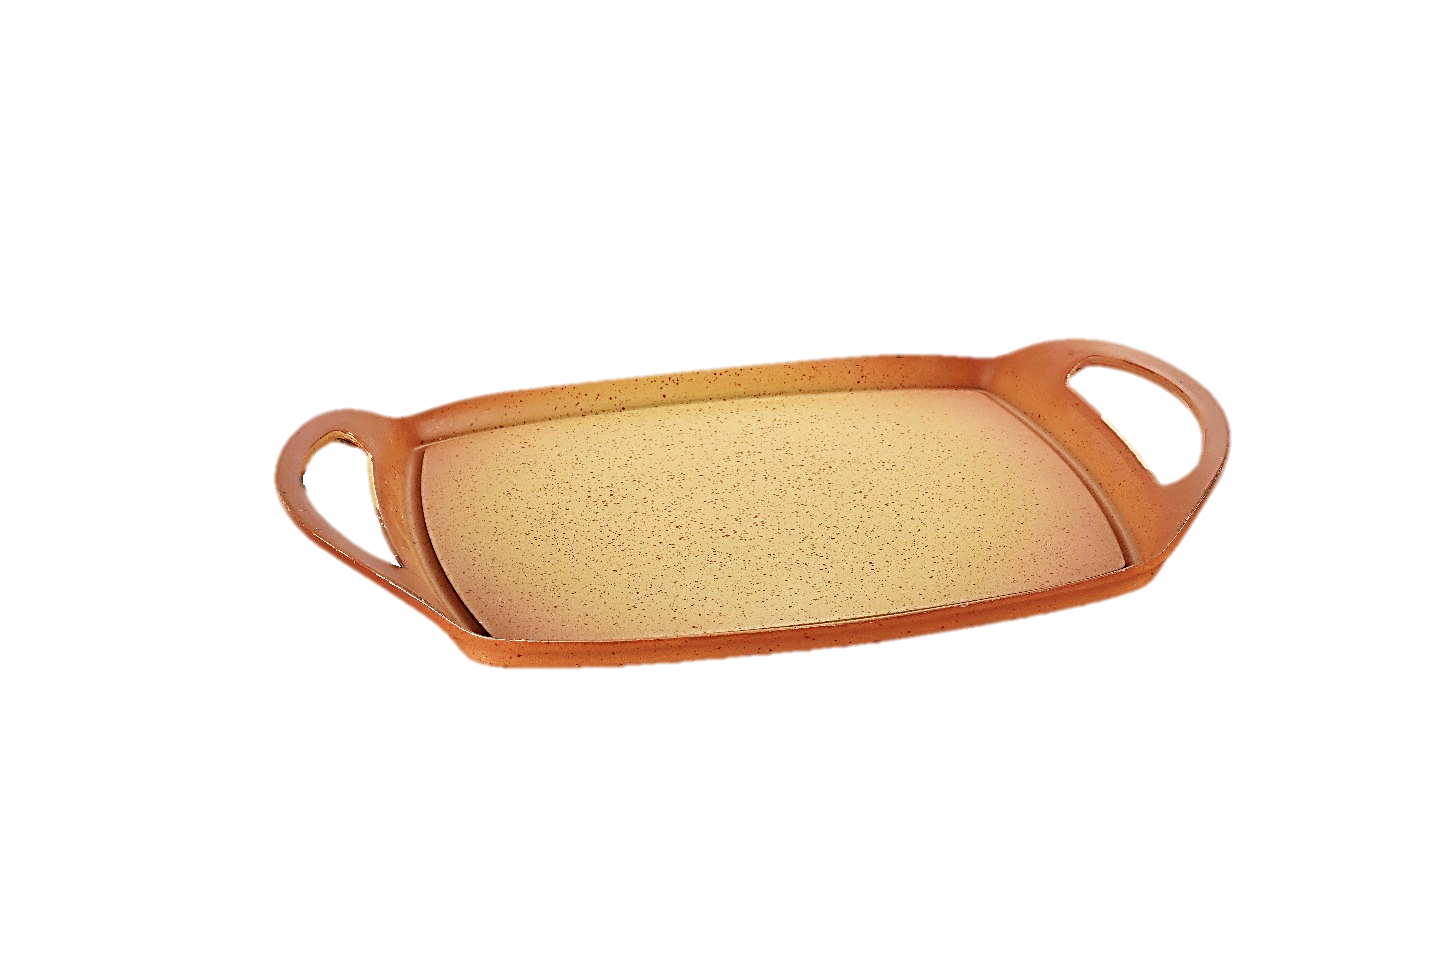 NEWARE Terra Cotta Cooking Set - 11 inch Non Stick Baking Pan, 11 inch x 11  inch Square Grill Pan, and 9.5 inch Casserole Stock Pot 100% PFOA Free